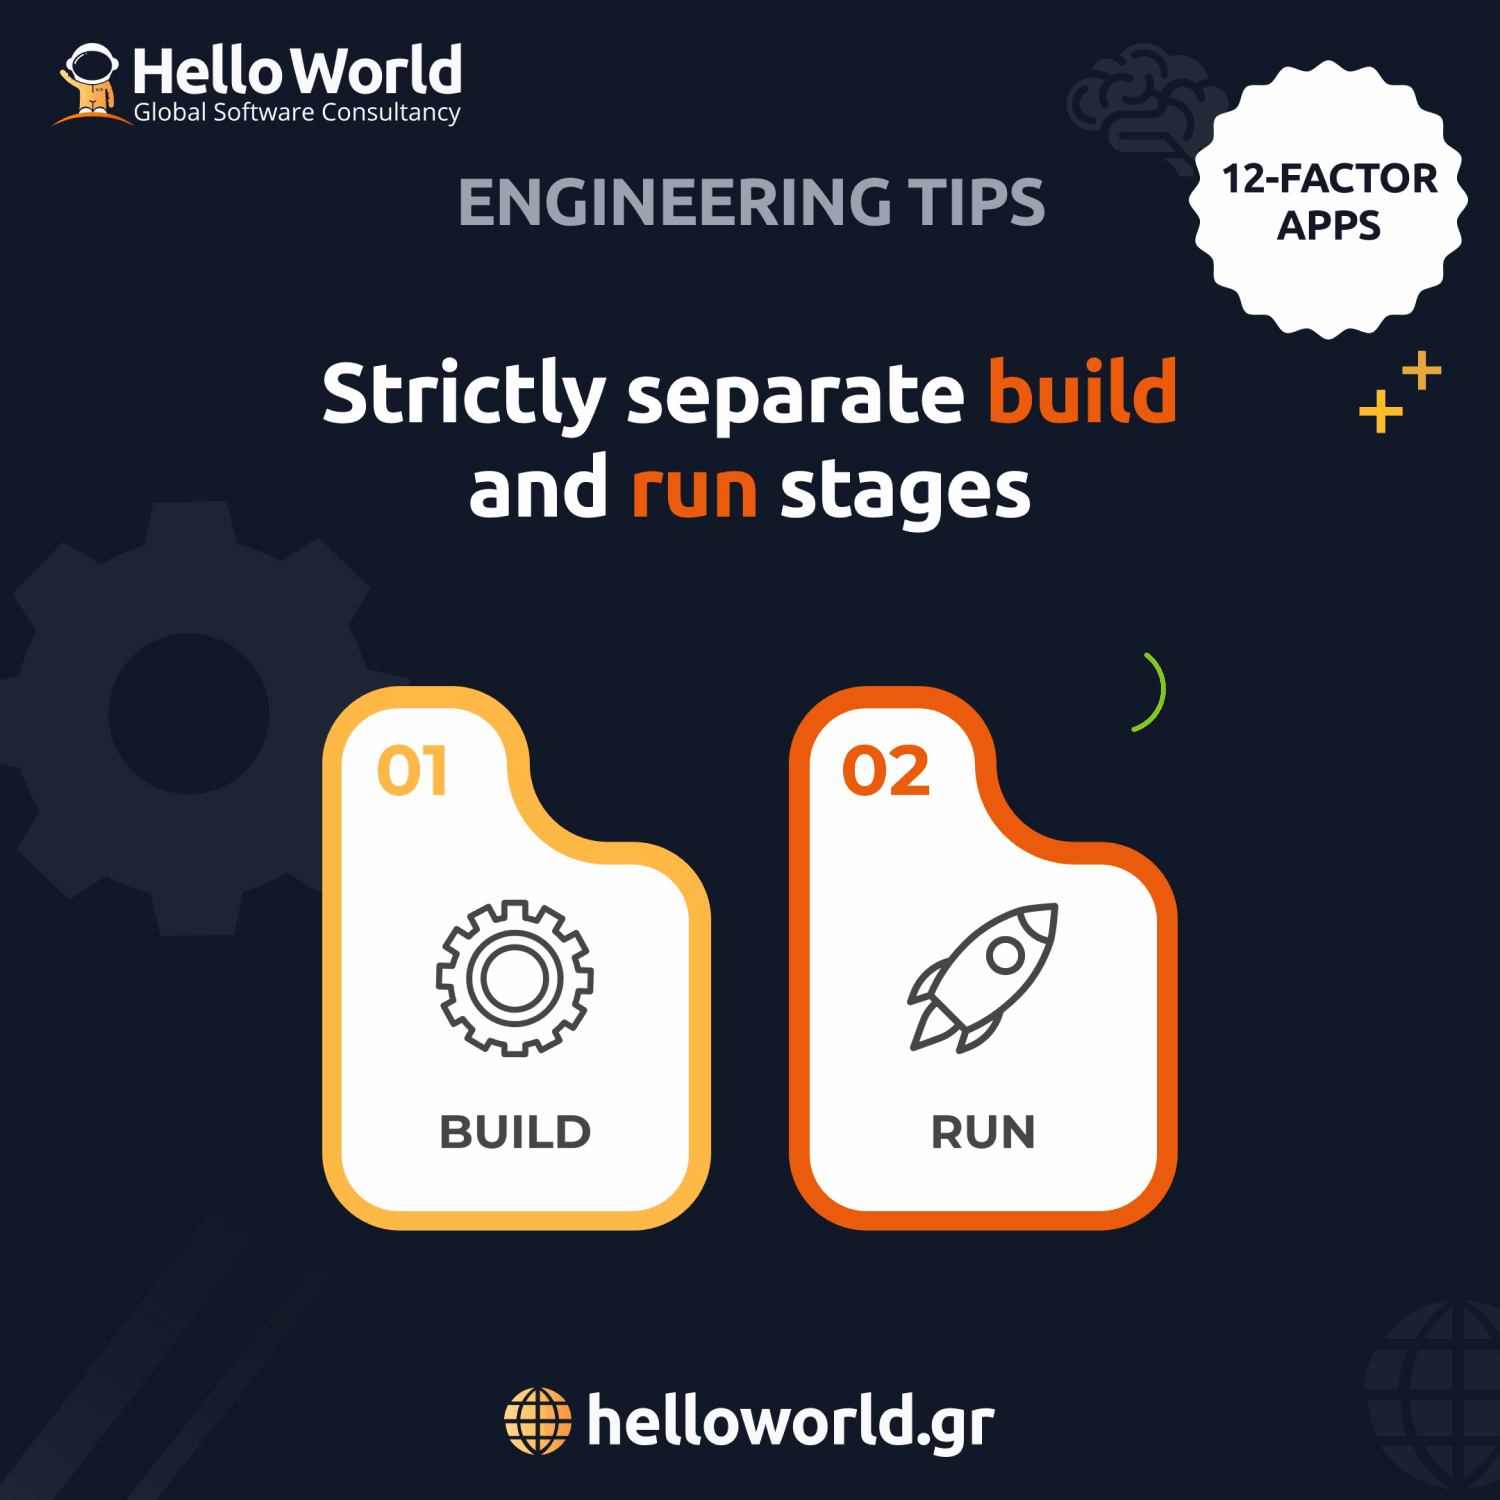 Build, release, run: Strictly separate build and run stages